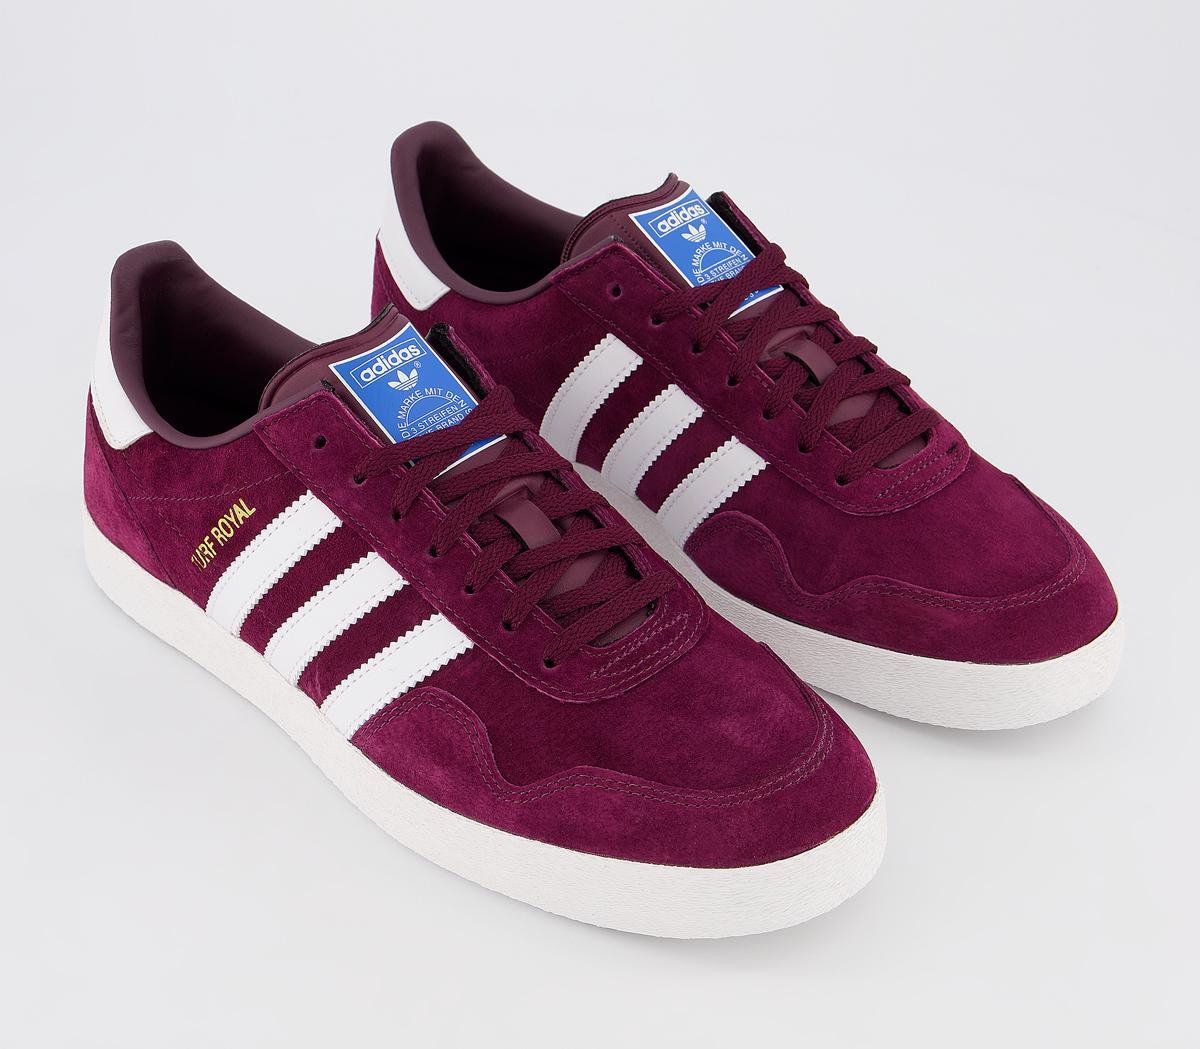 adidas Turf Royal Trainers Maroon White - His trainers